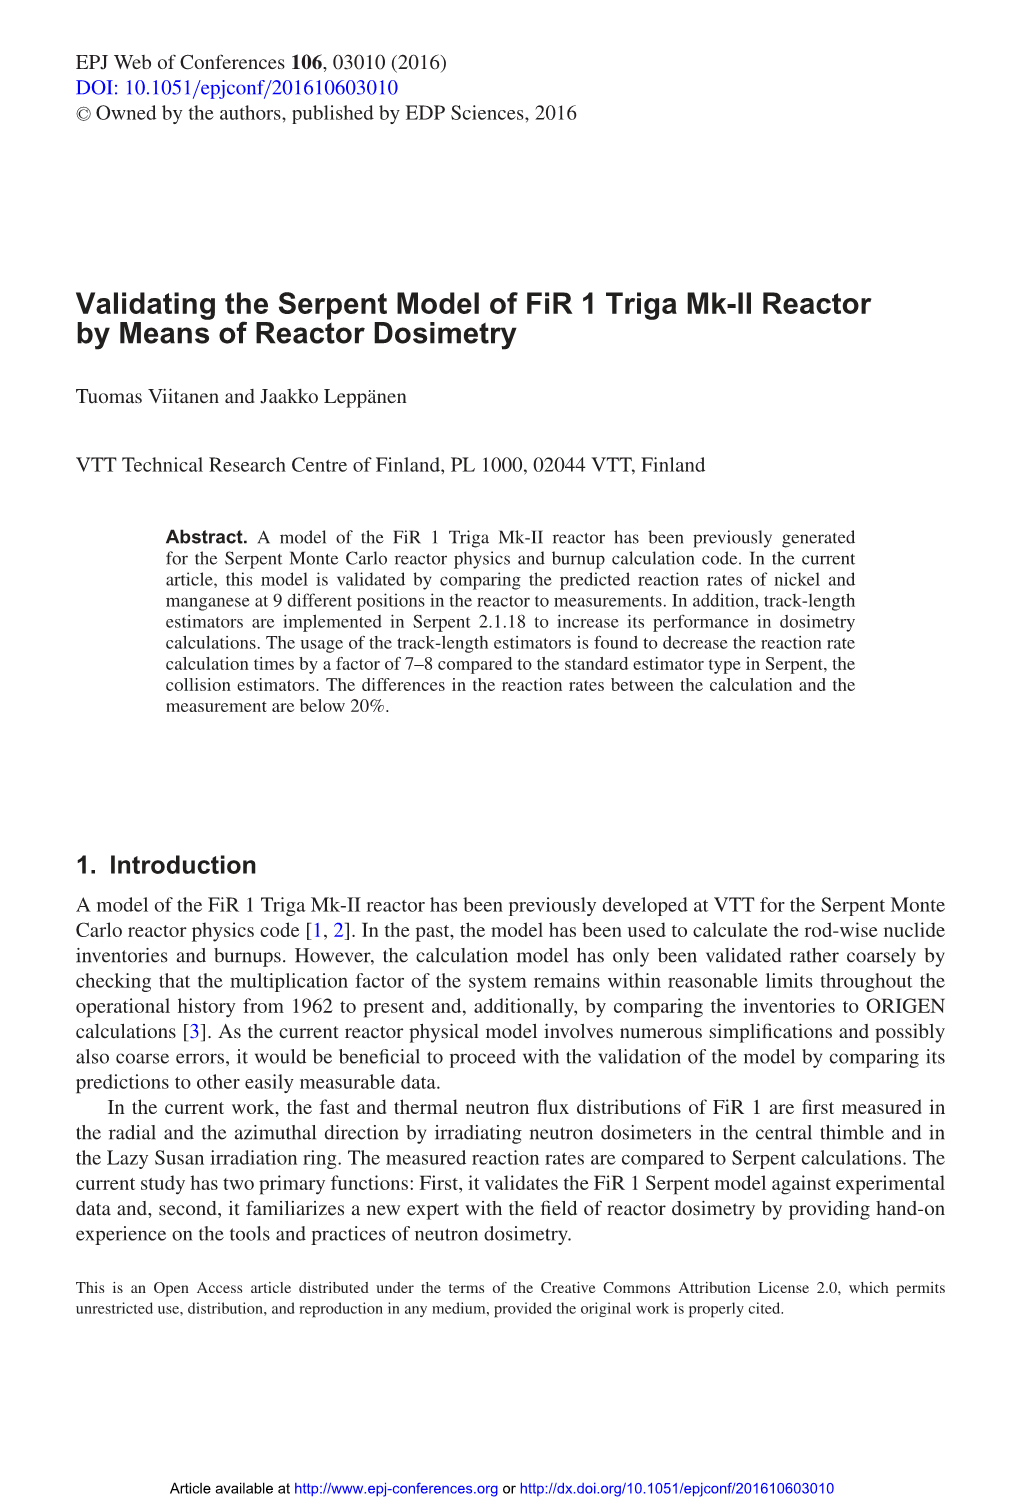 Validating the Serpent Model of Fir 1 Triga Mk-II Reactor by Means of Reactor Dosimetry